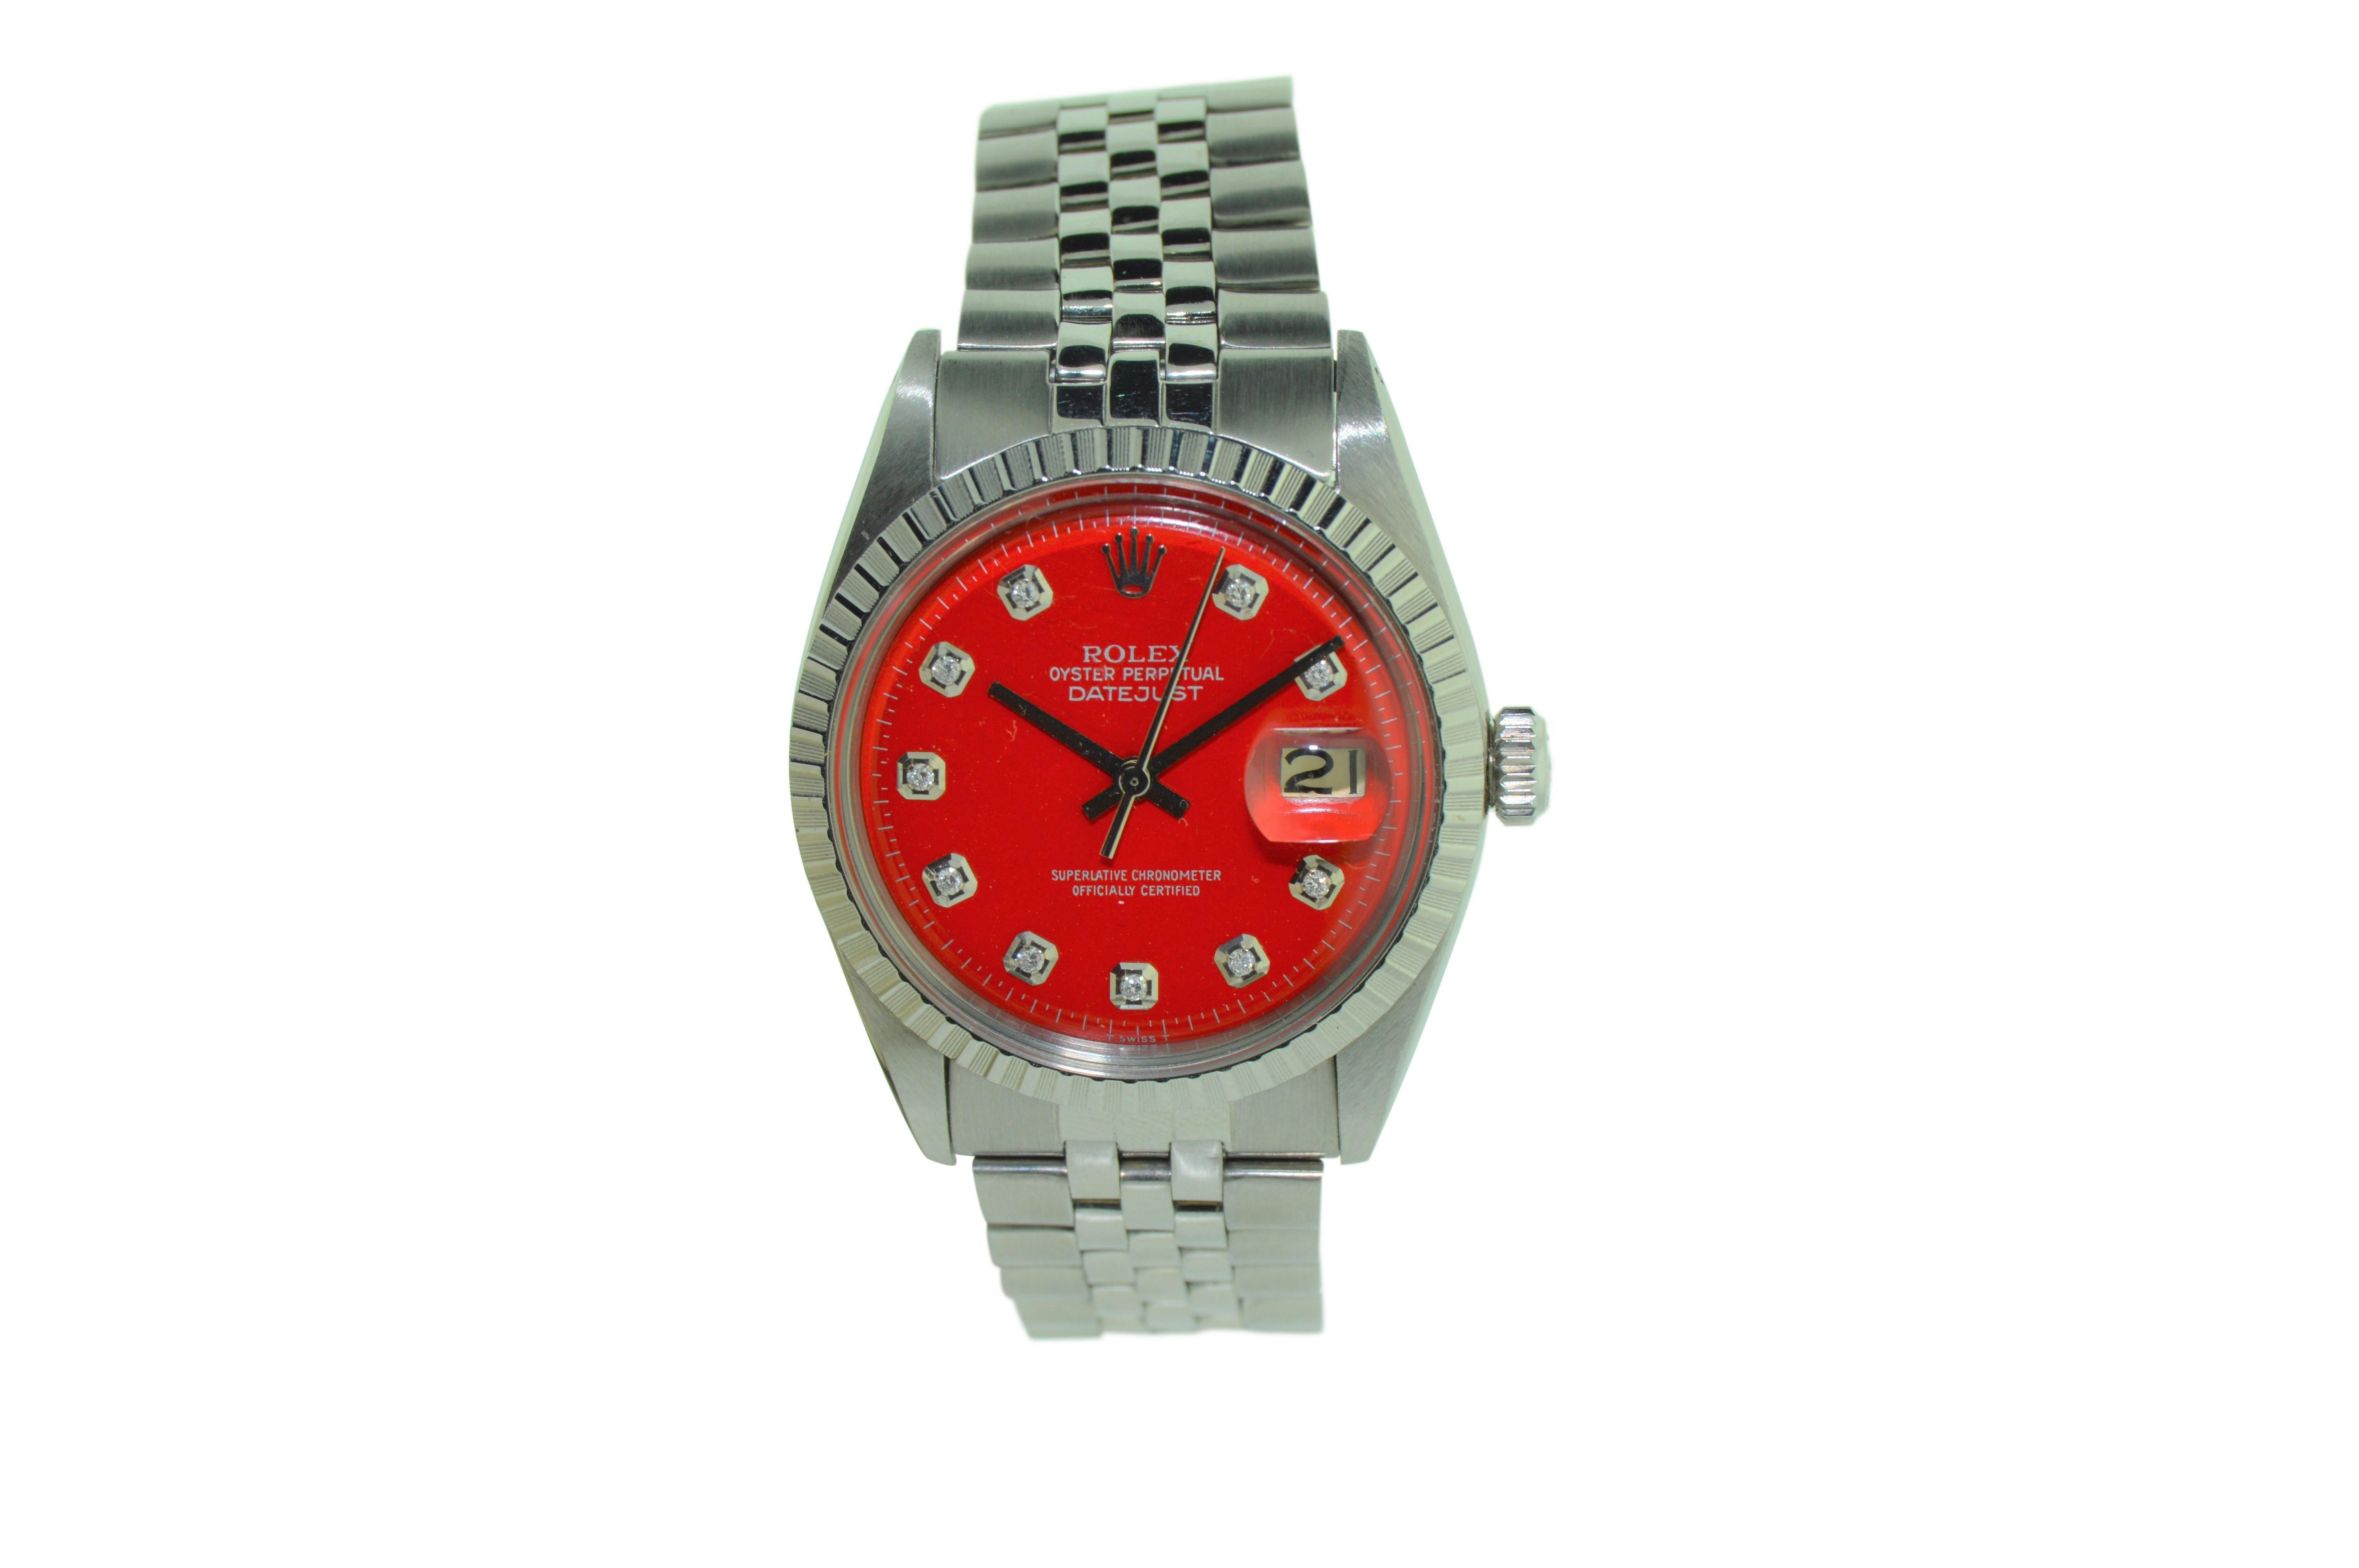 FACTORY / HOUSE: Rolex Watch Company
STYLE / REFERENCE: Datejust / 1603
METAL / MATERIAL: Stainless Steel 
DIMENSIONS:  43mm  X  36mm
CIRCA: 1977
MOVEMENT / CALIBER: 1570 / 26 Jewels / Perpetual Winding
DIAL / HANDS: Custom Red Diamond Dial / Baton